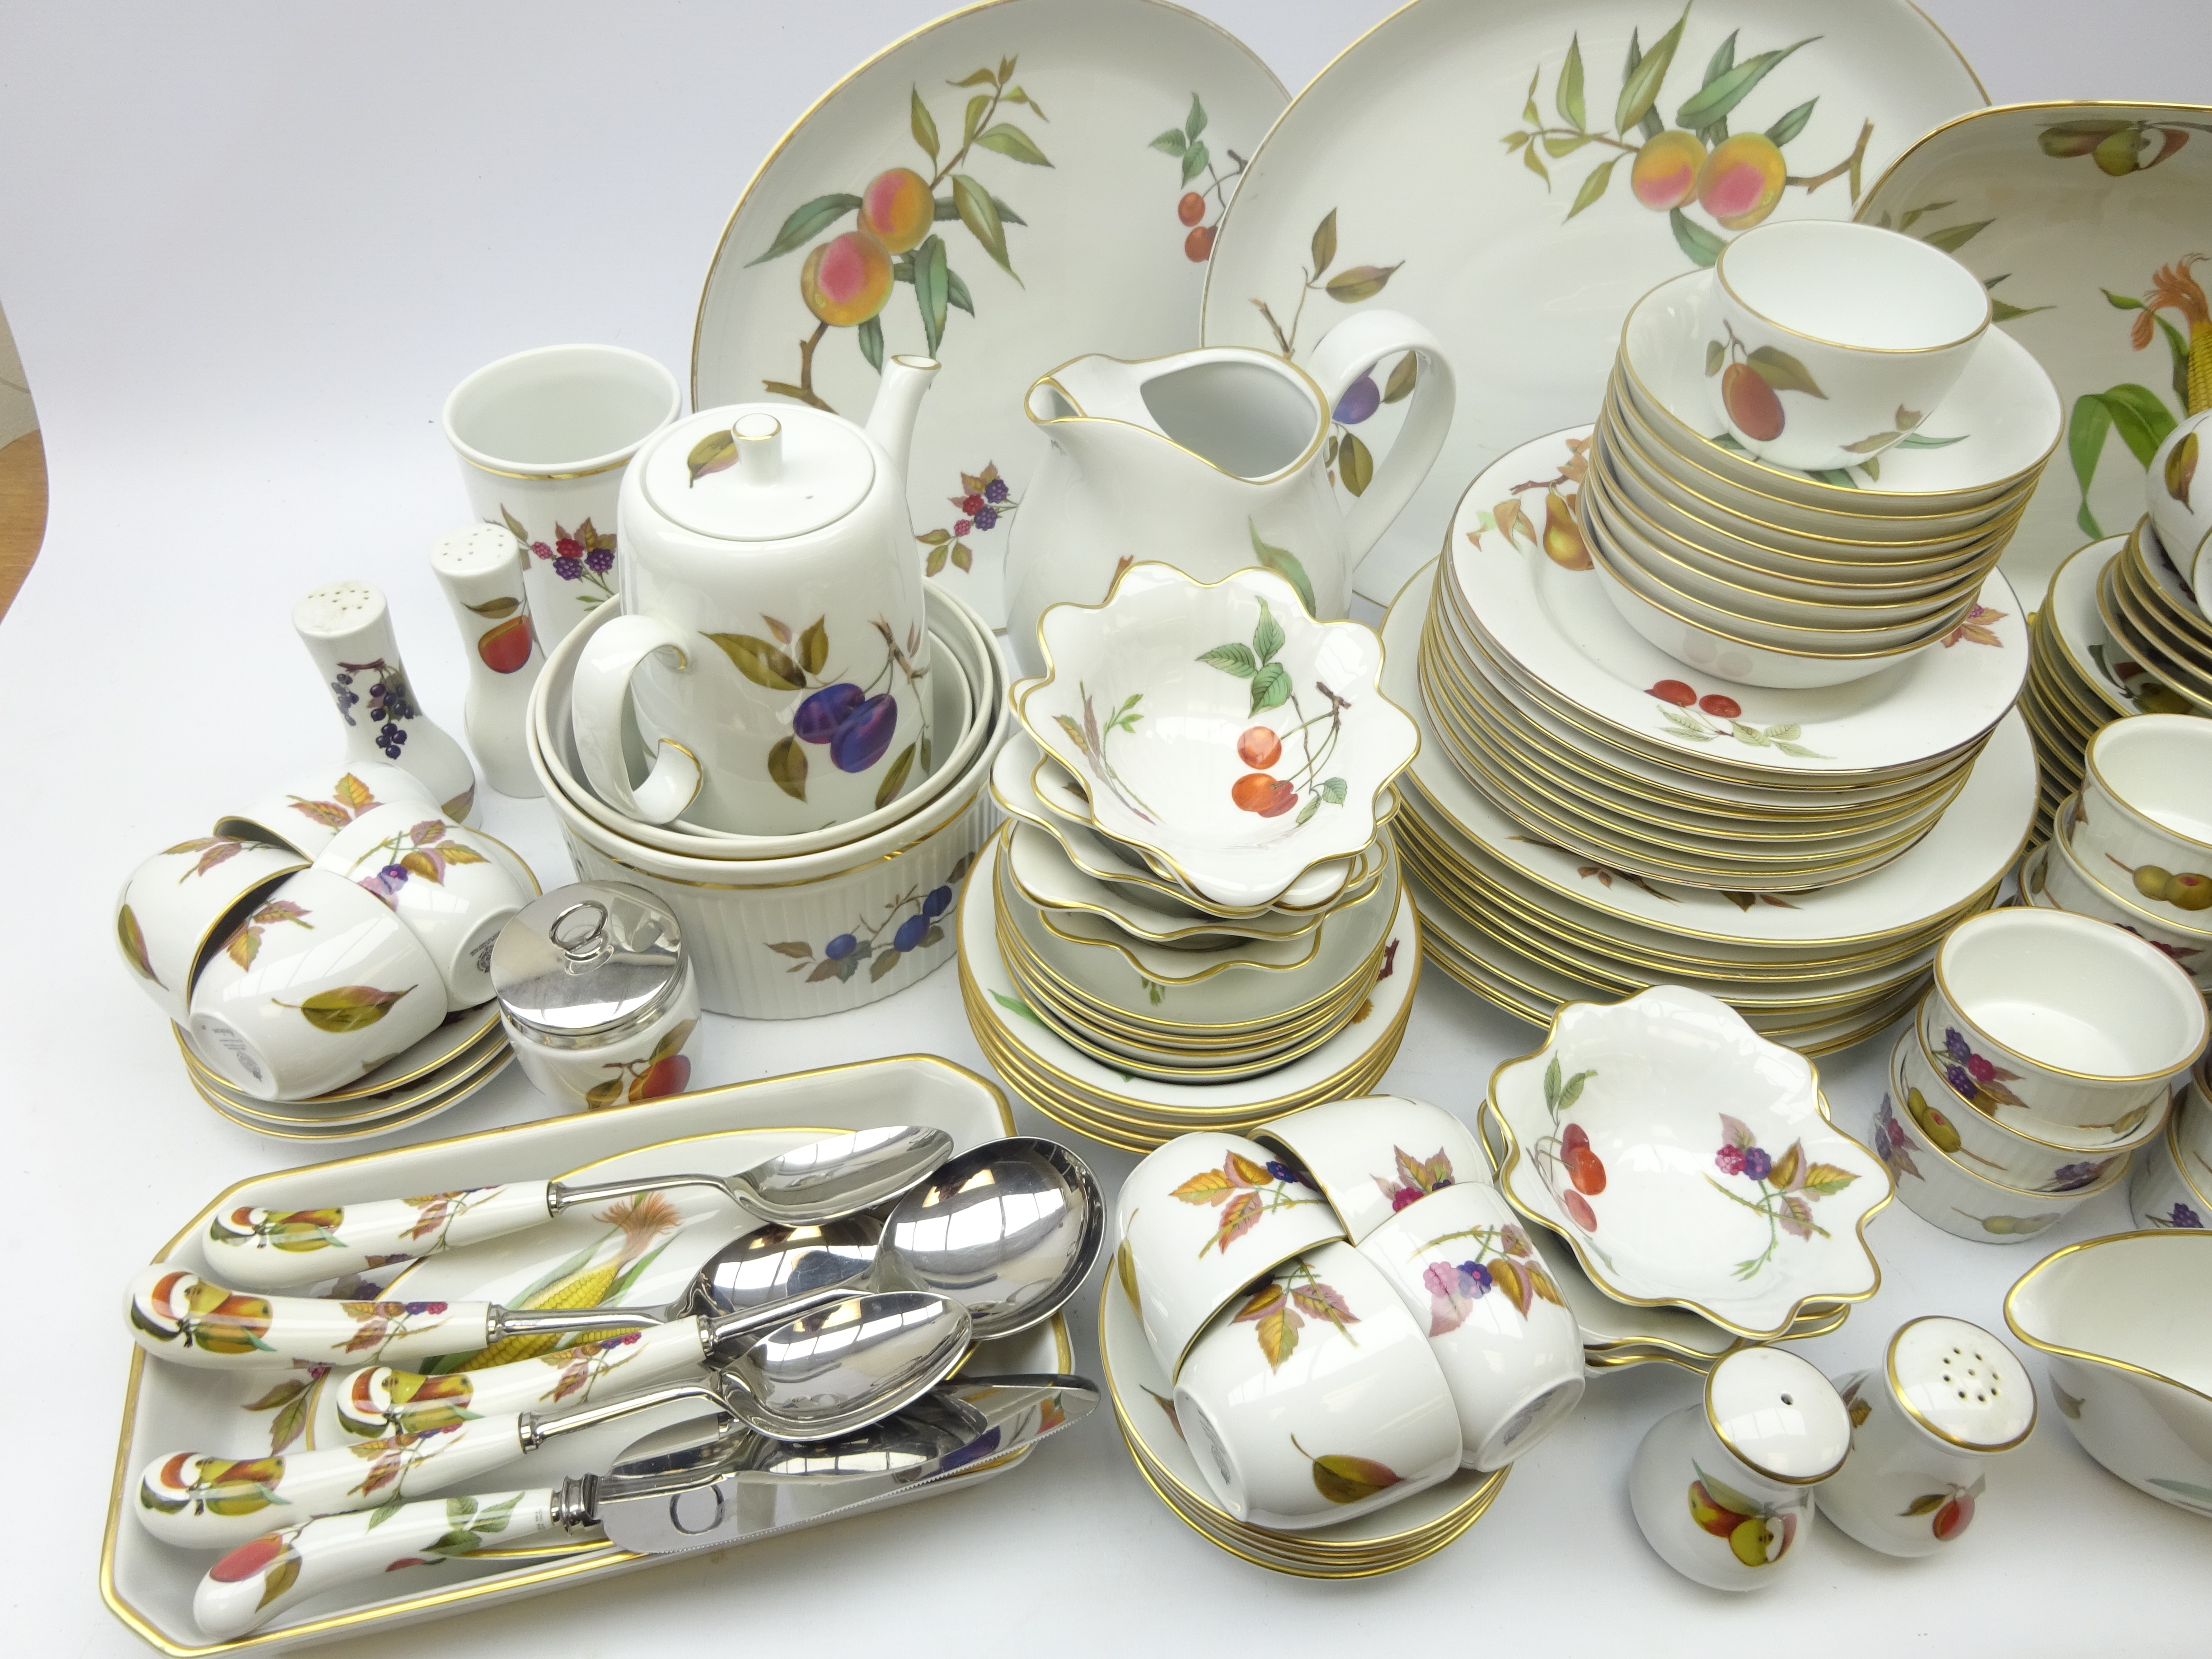 Extensive Royal Worcester dinner service comprising eight 26cm plates, eight 21cm plates, - Image 2 of 3